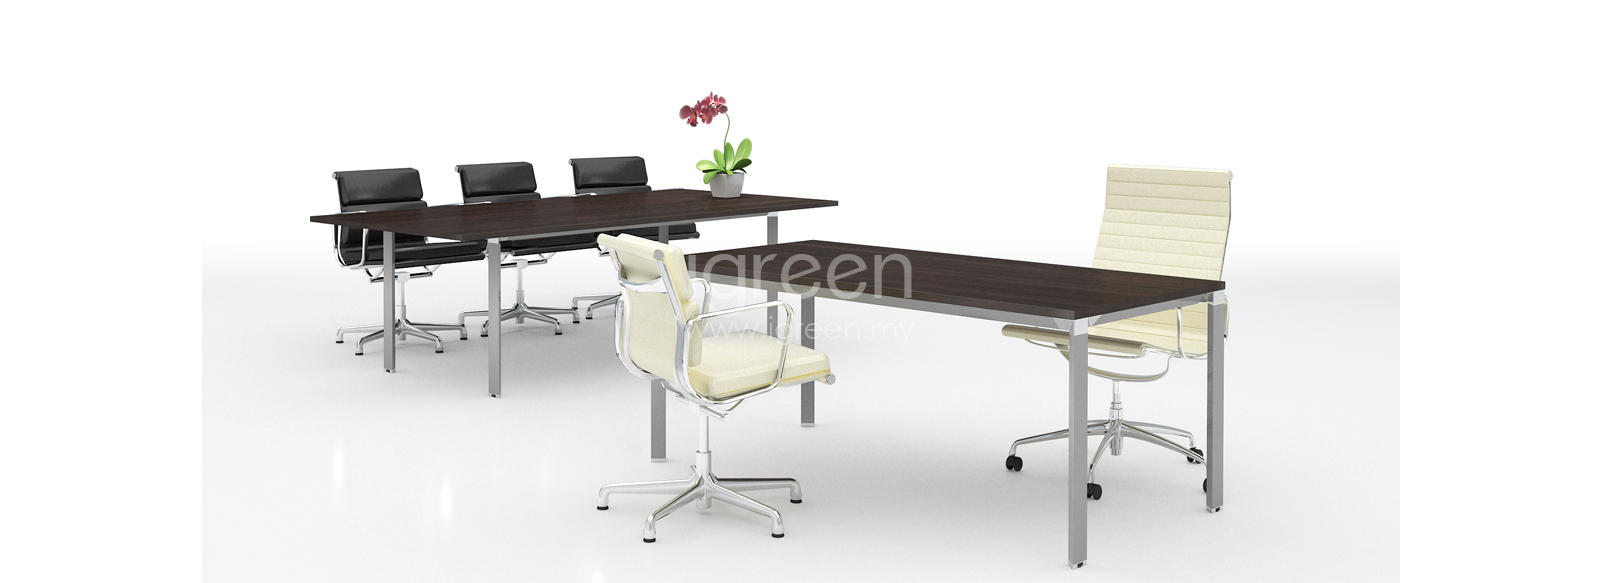 ace series_meeting table